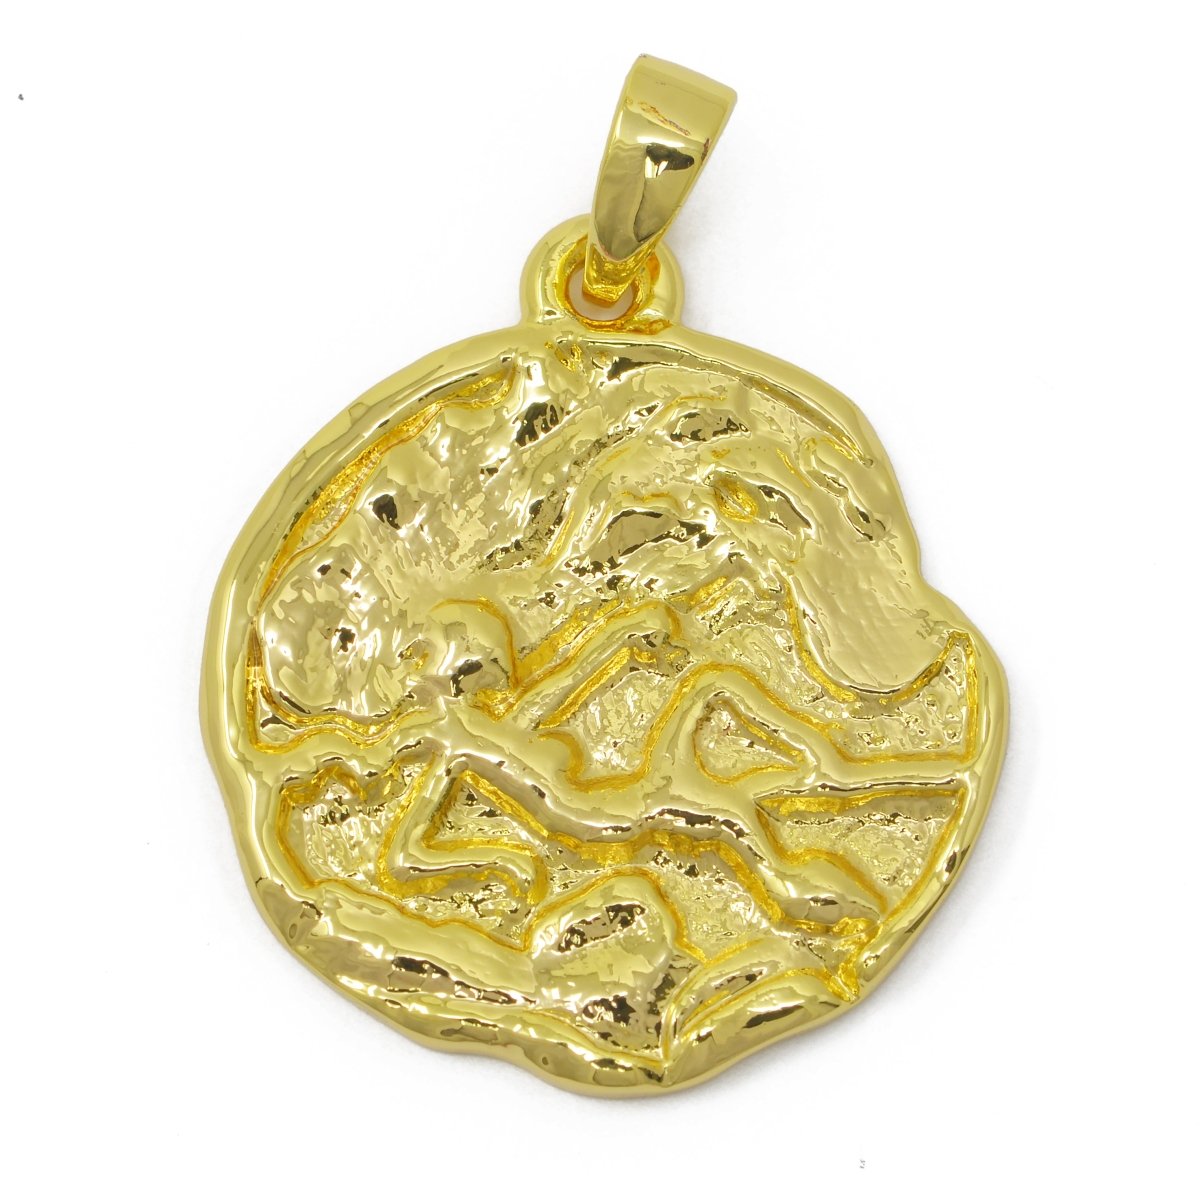 24K Gold Filled Zodiac Horoscope Sign Constellation Medallion Pendant Charm Rustic Rough Hammered Coin, A-638-A-650 - DLUXCA